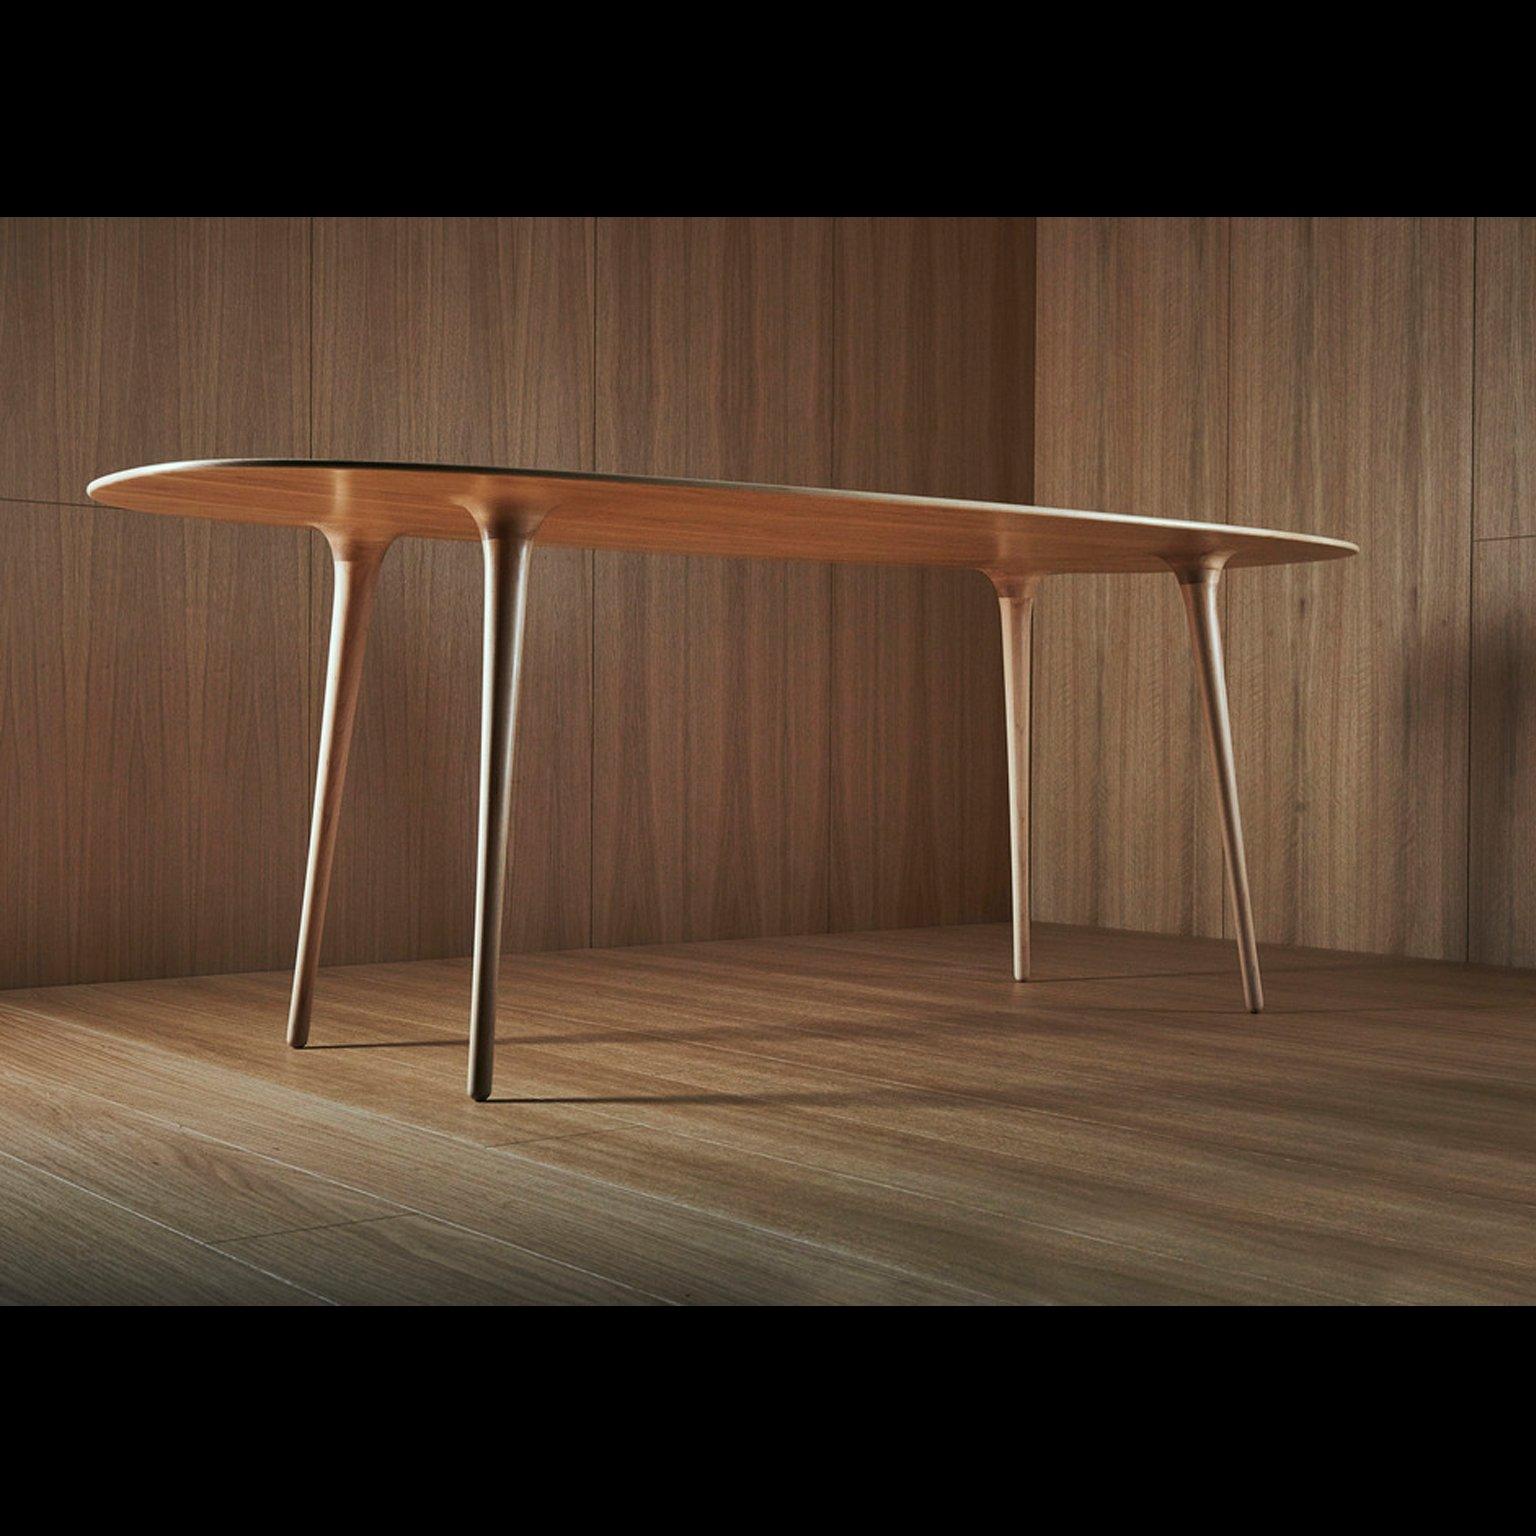 Carved Contemporary 'Table 4' Table or Desk in Solid Maple by Object Studio For Sale